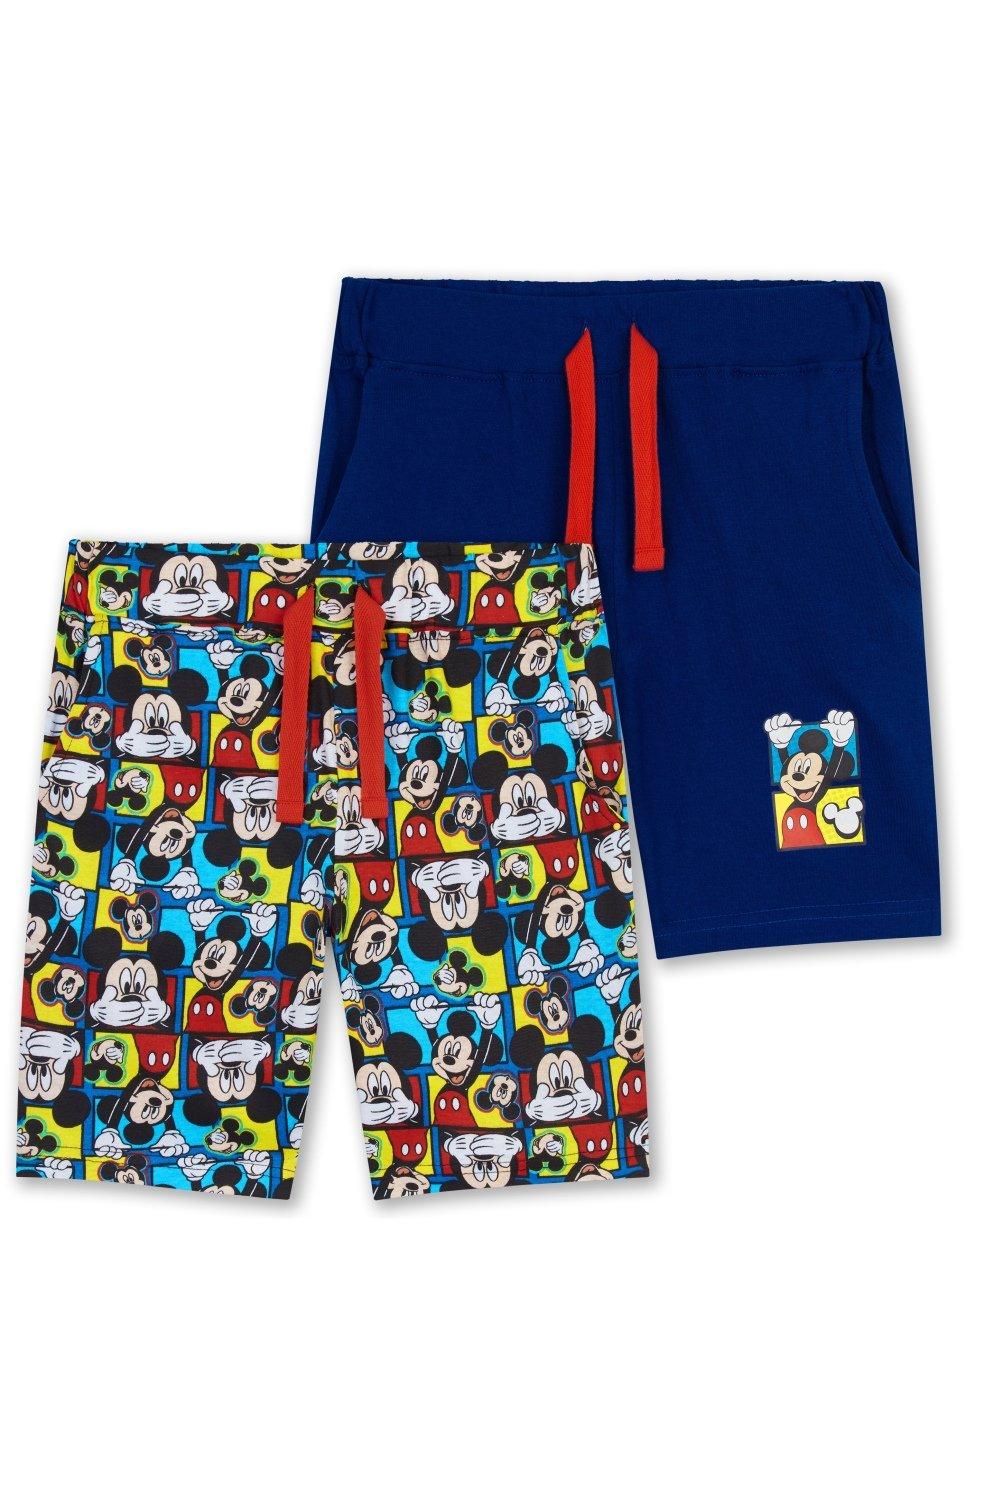 Mickey Mouse 2 Pack Shorts